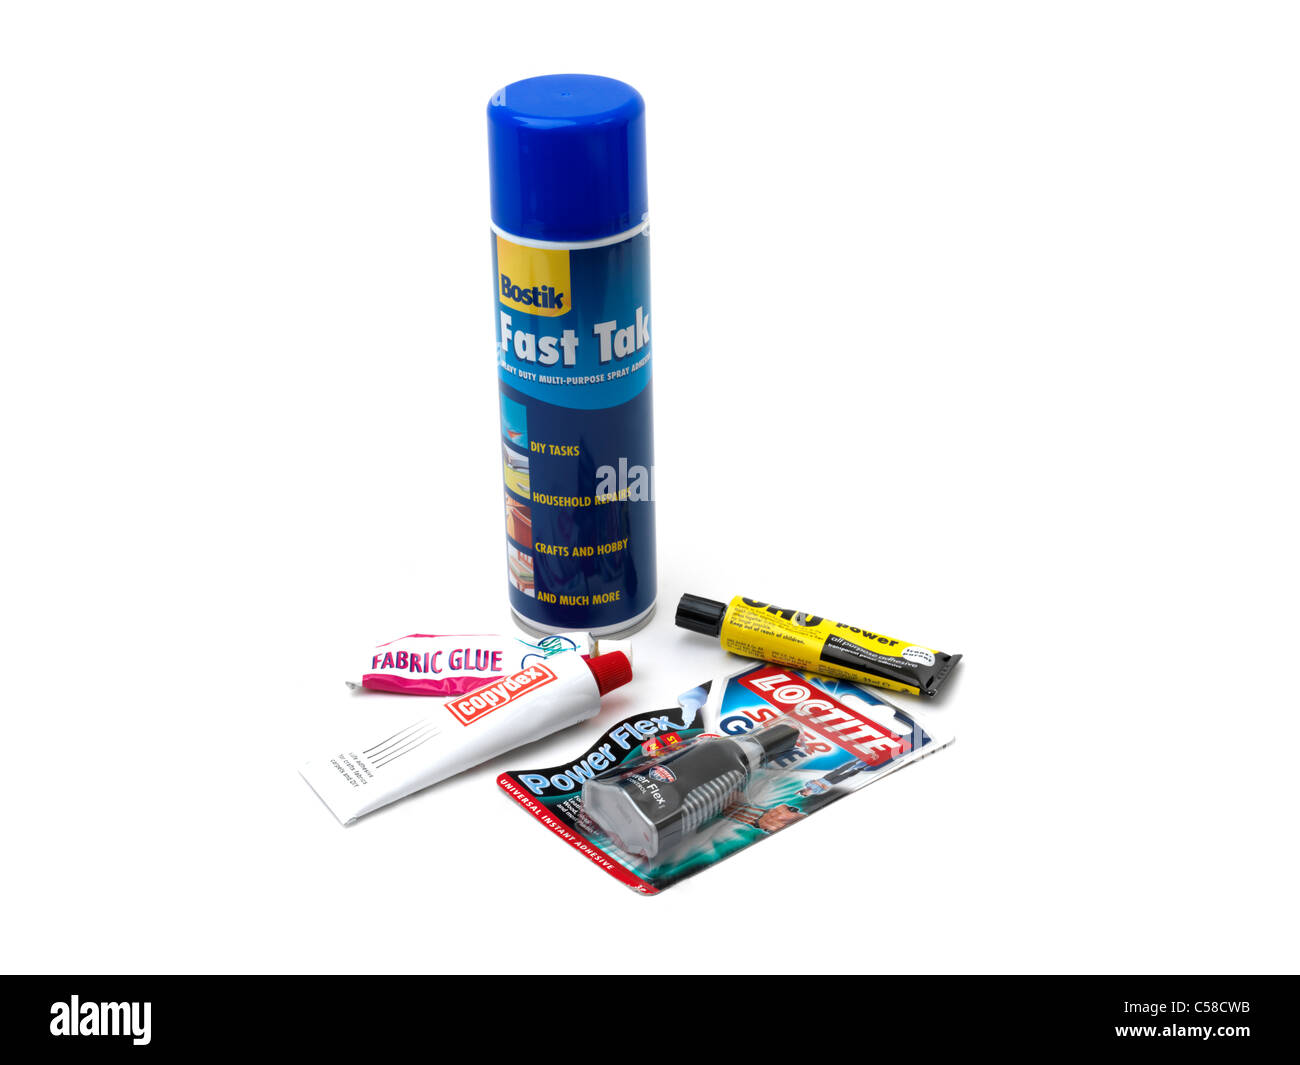 Winneconne, WI - 6 October 2020: A tube of Loctite super glue gel control  ultra on an isolated background Stock Photo - Alamy